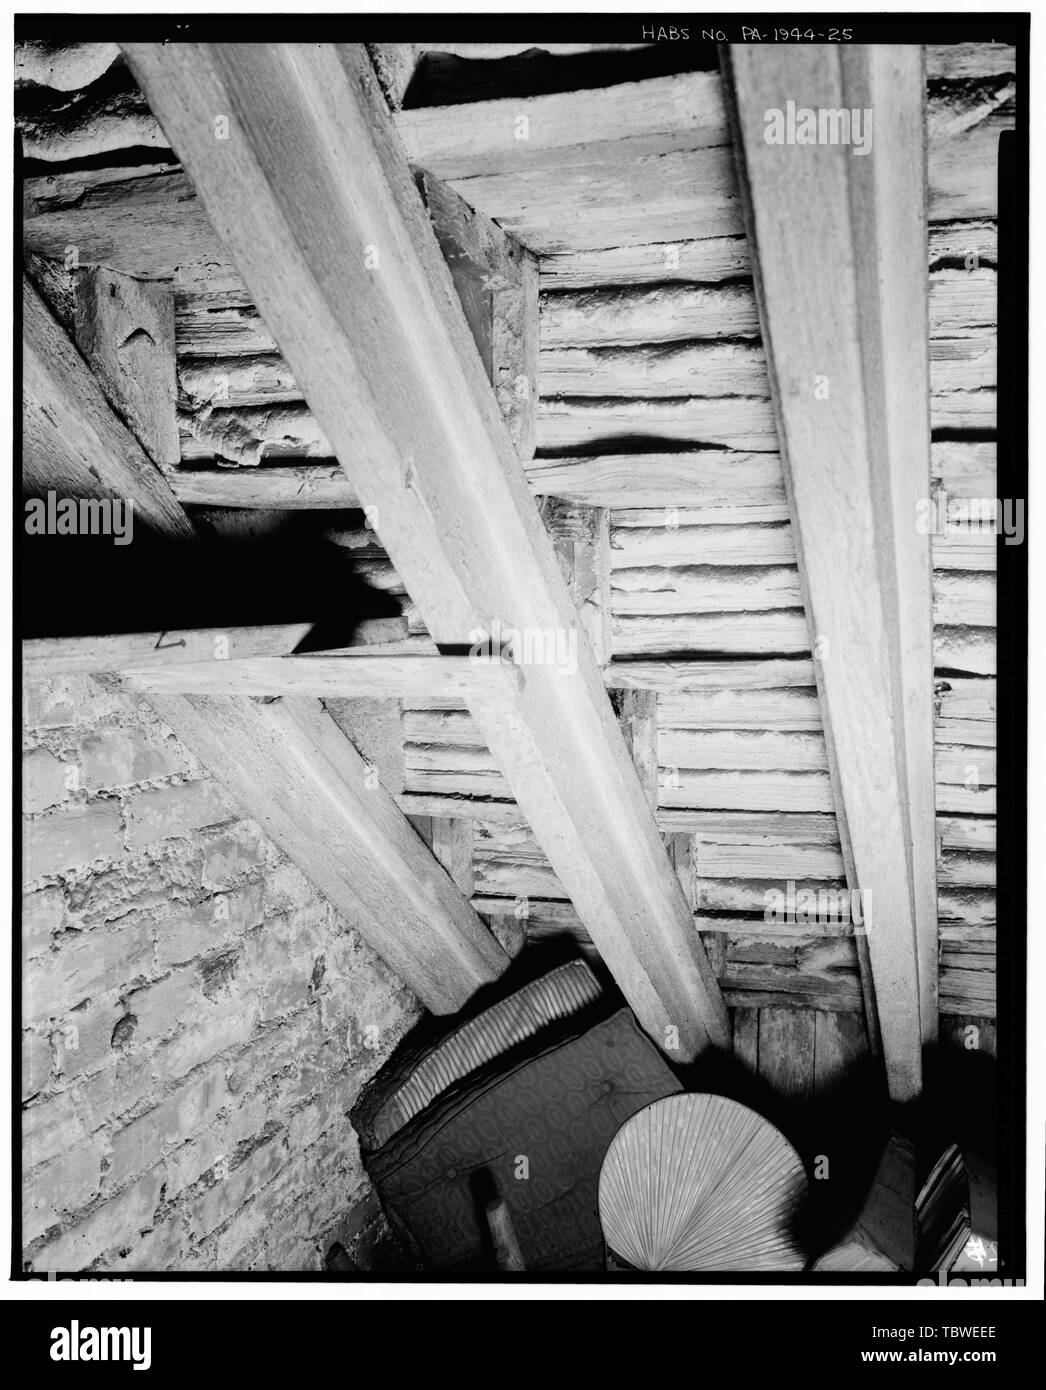 MAIN MEETING ROOM STAIRWAY IN SOUTHEAST CORNER. Stairway seen from below showing lath and plaster fireproofing applied to framing before treads and risers.  Twelfth Street Meeting House, 20 South Twelfth Street, Philadelphia, Philadelphia County, PA Stock Photo